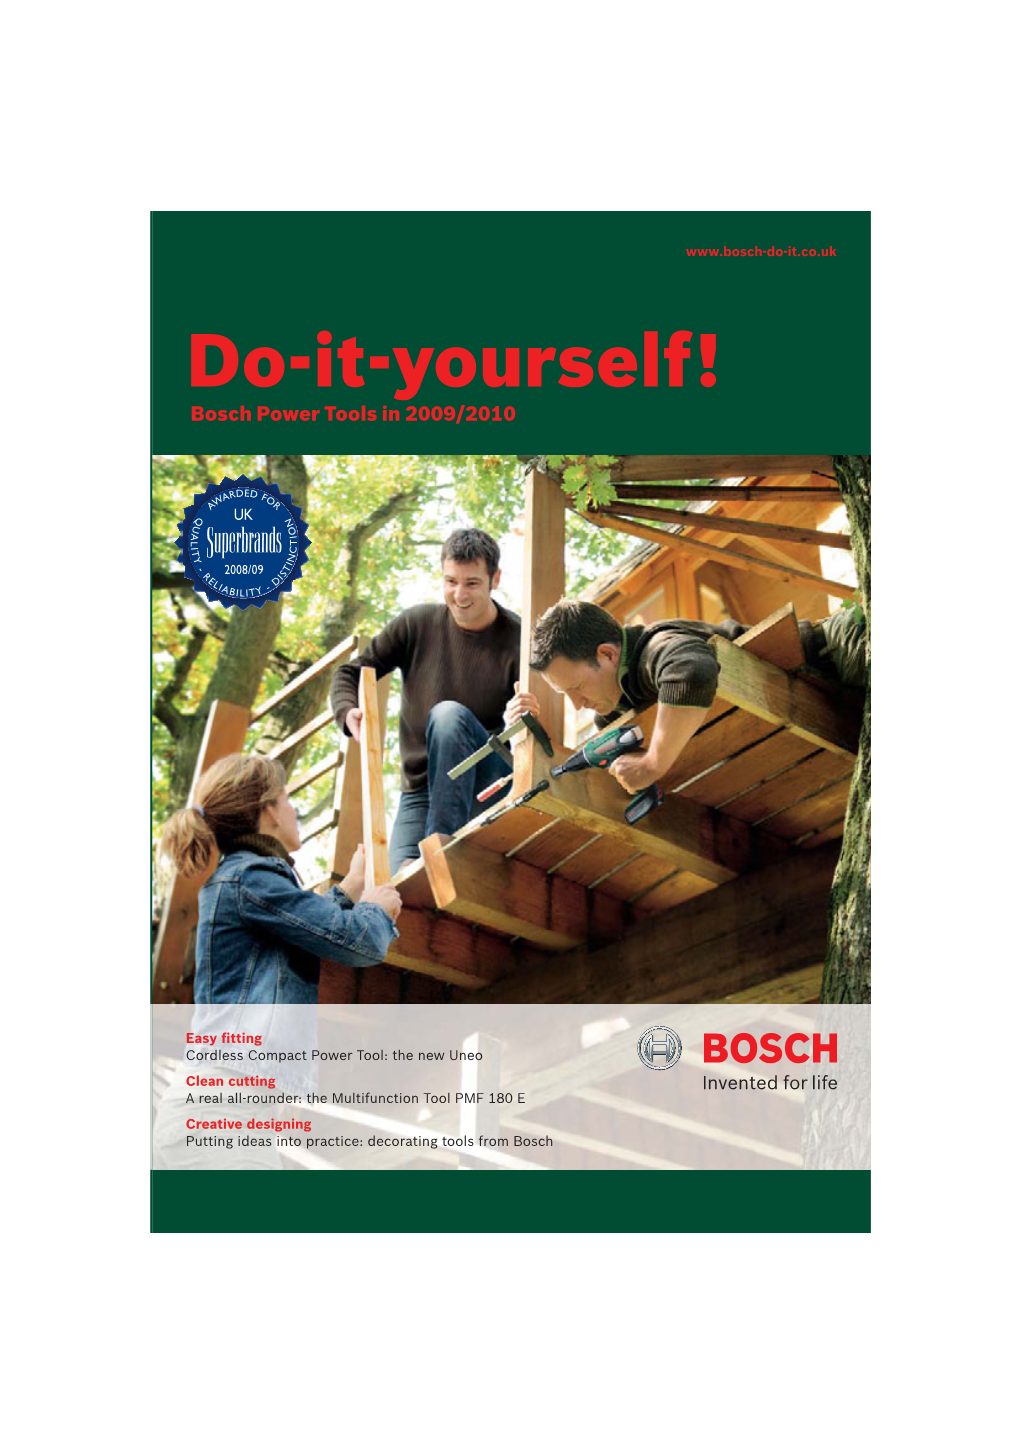 Do-It-Yourself! Bosch Power Tools in 2009/2010